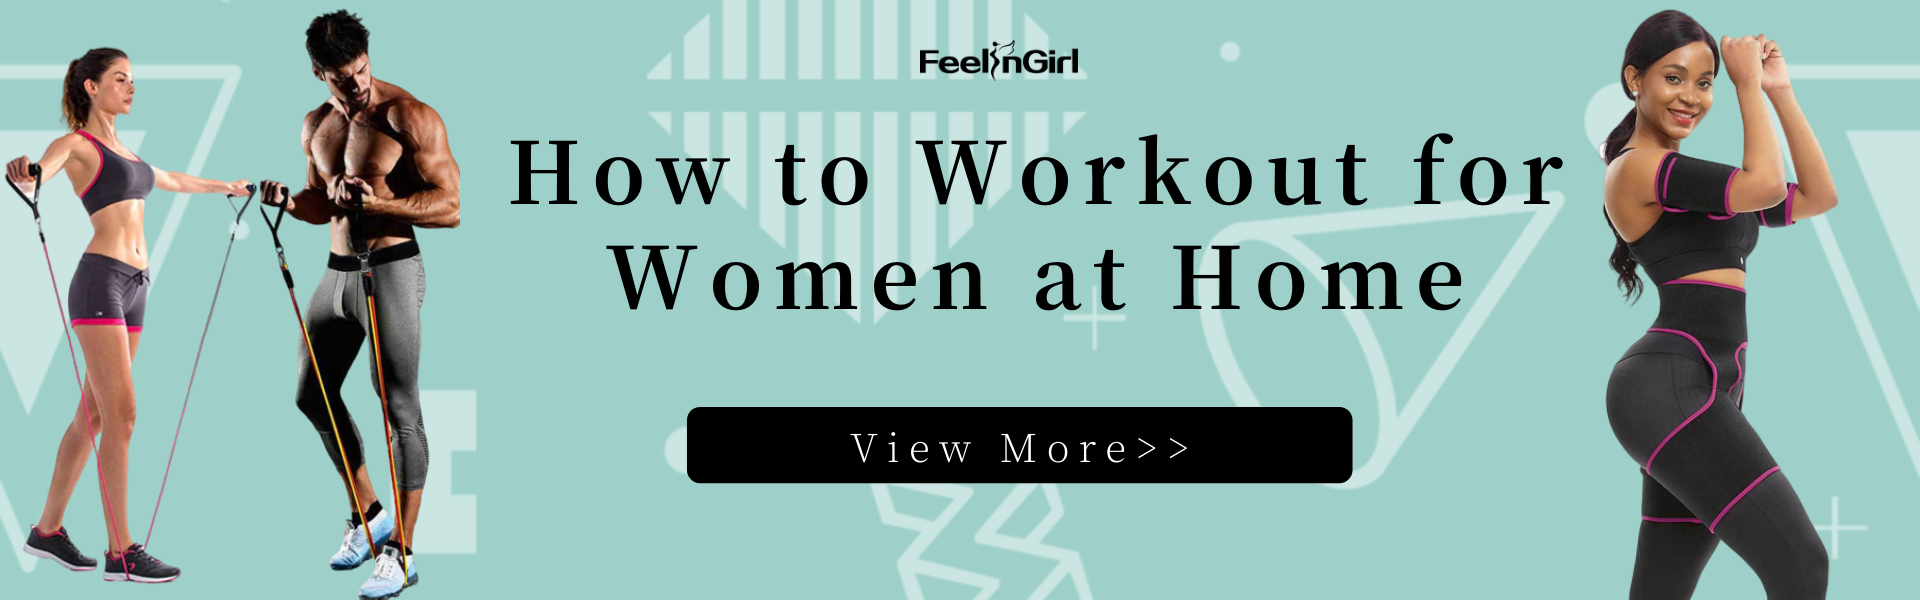 How to Workout for Women at Home